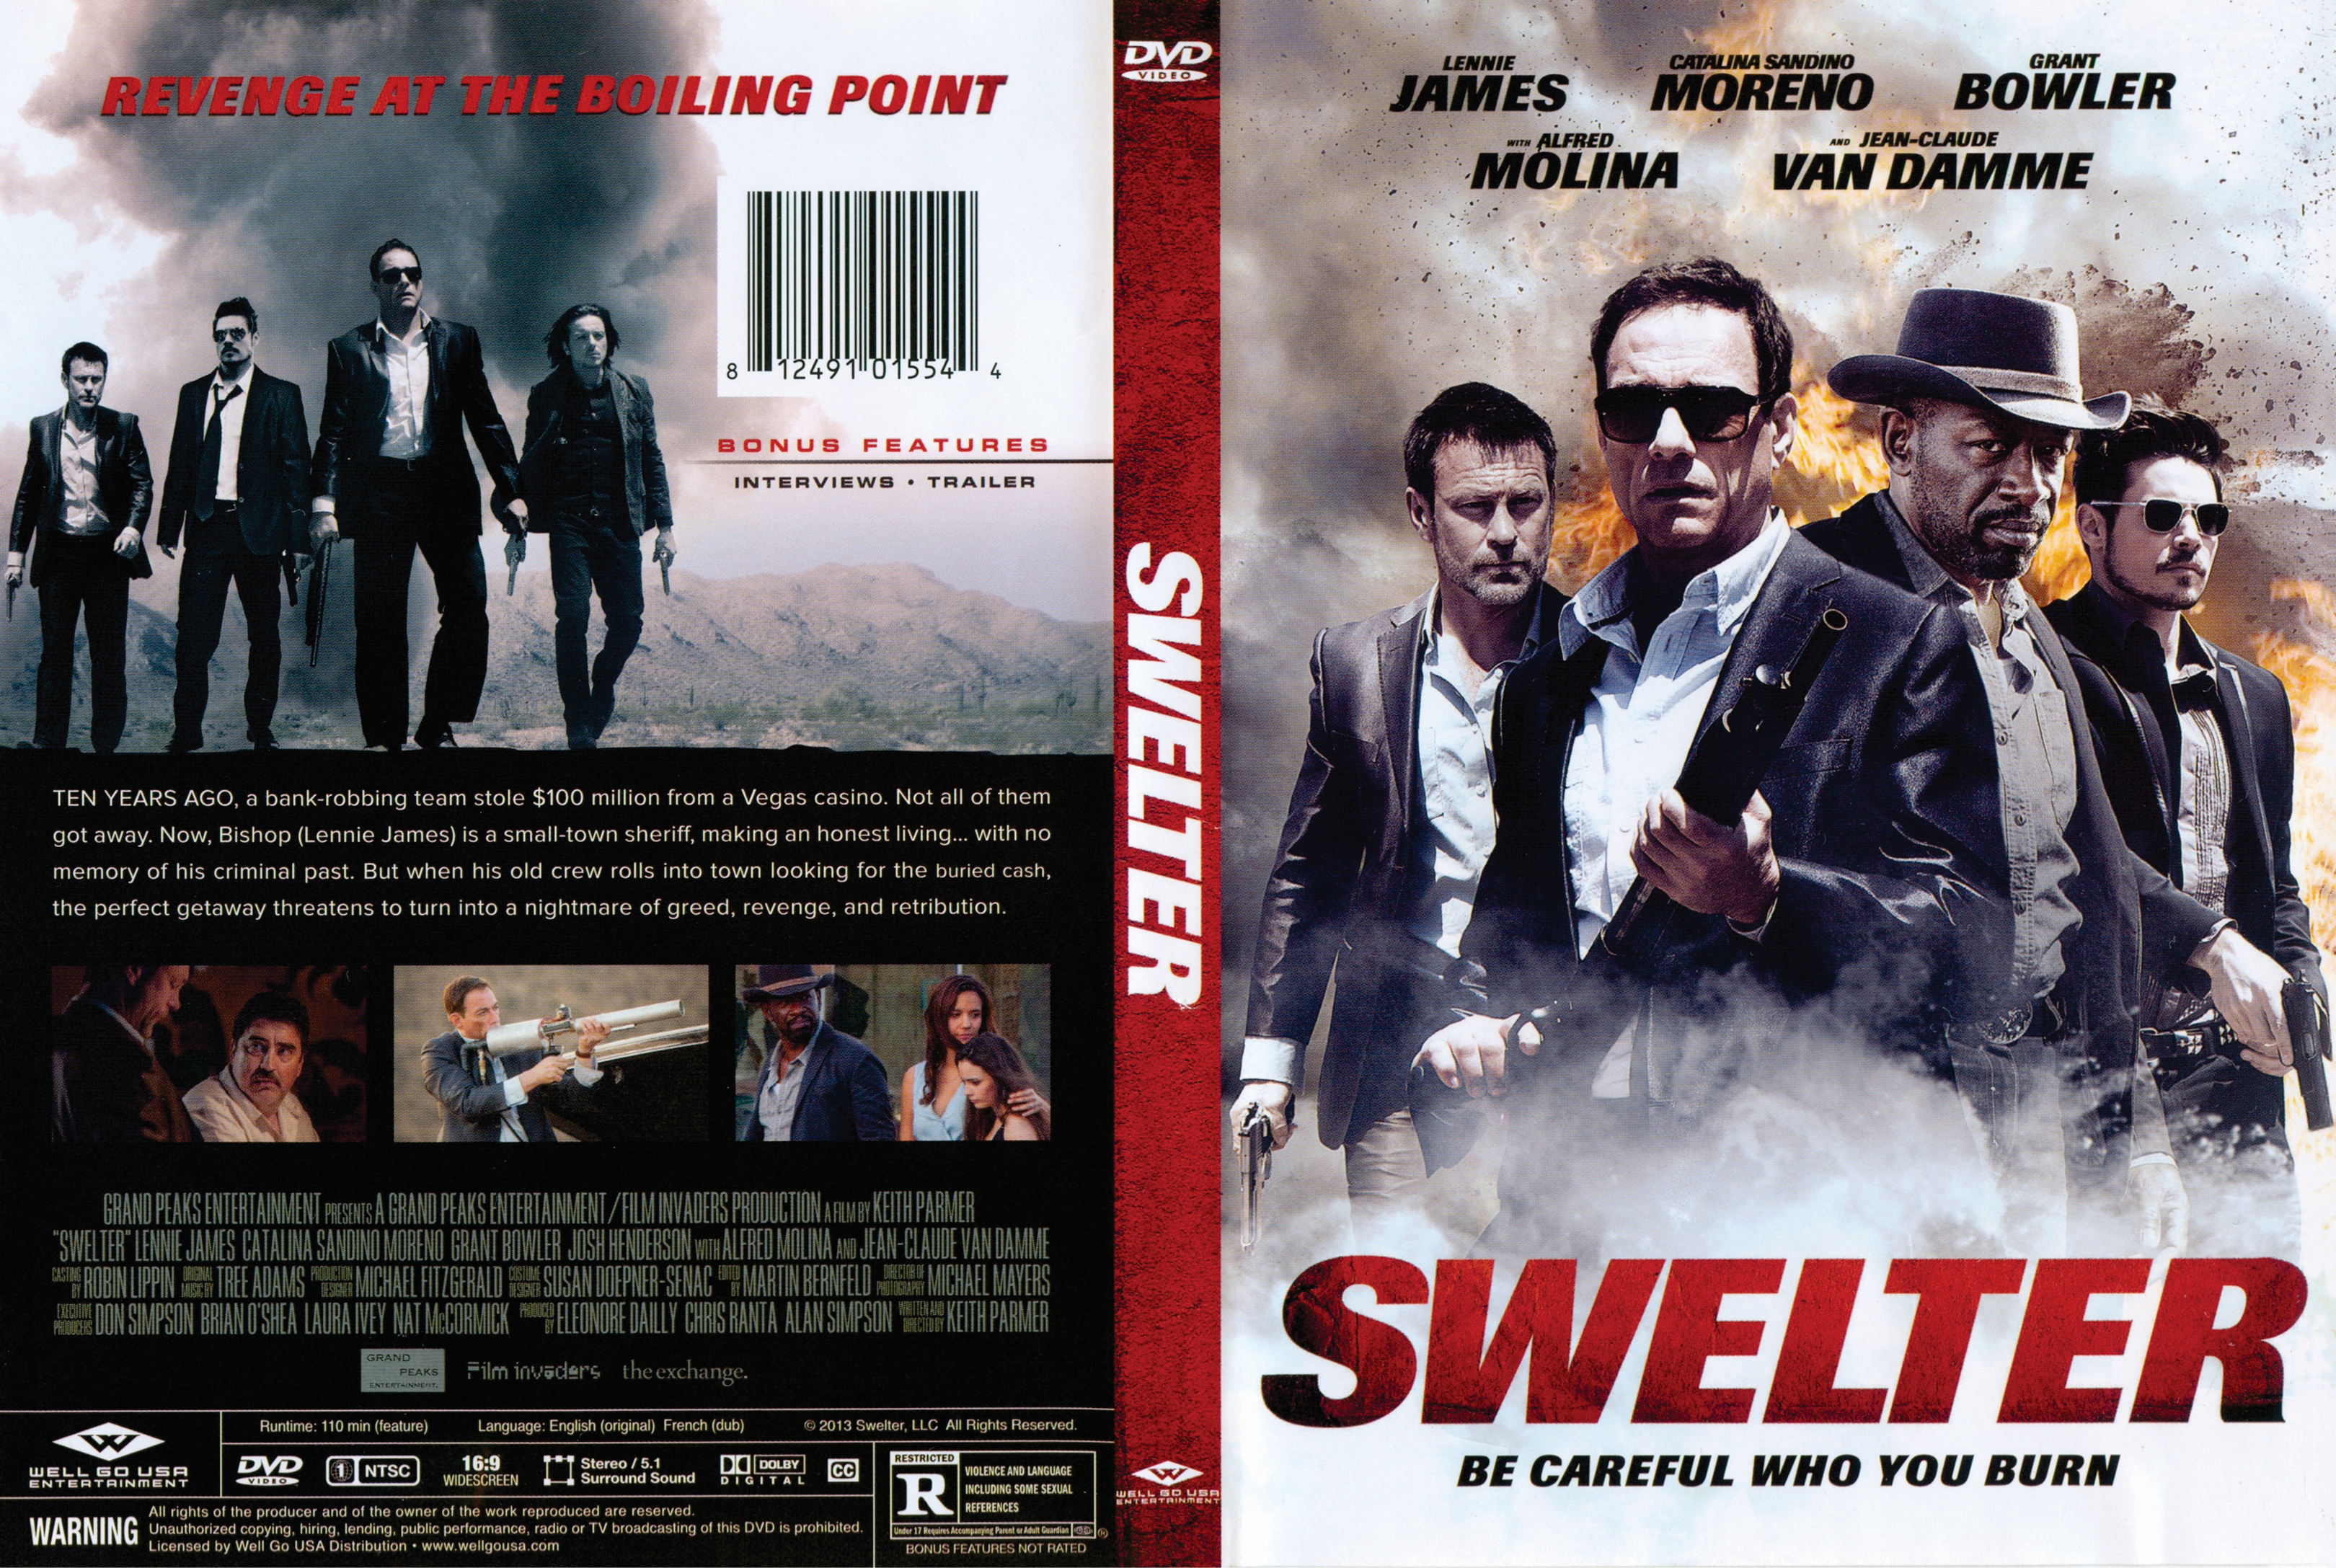 Jaquette DVD Swelter - Duels Zone 1